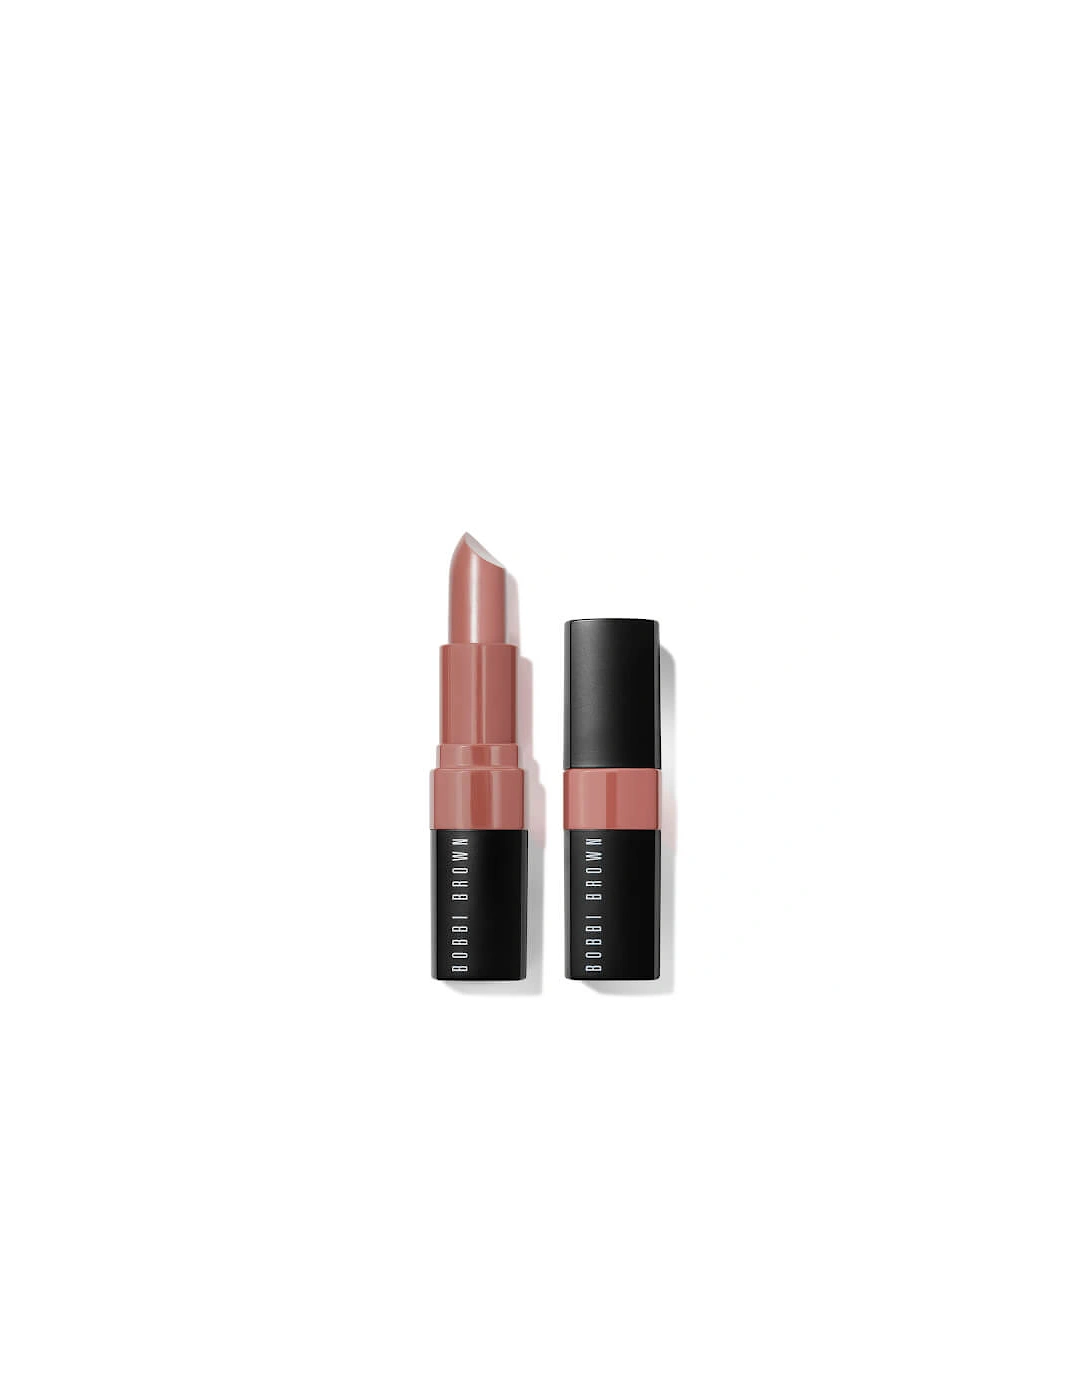 Crushed Lip Colour - Rich Cocoa, 2 of 1